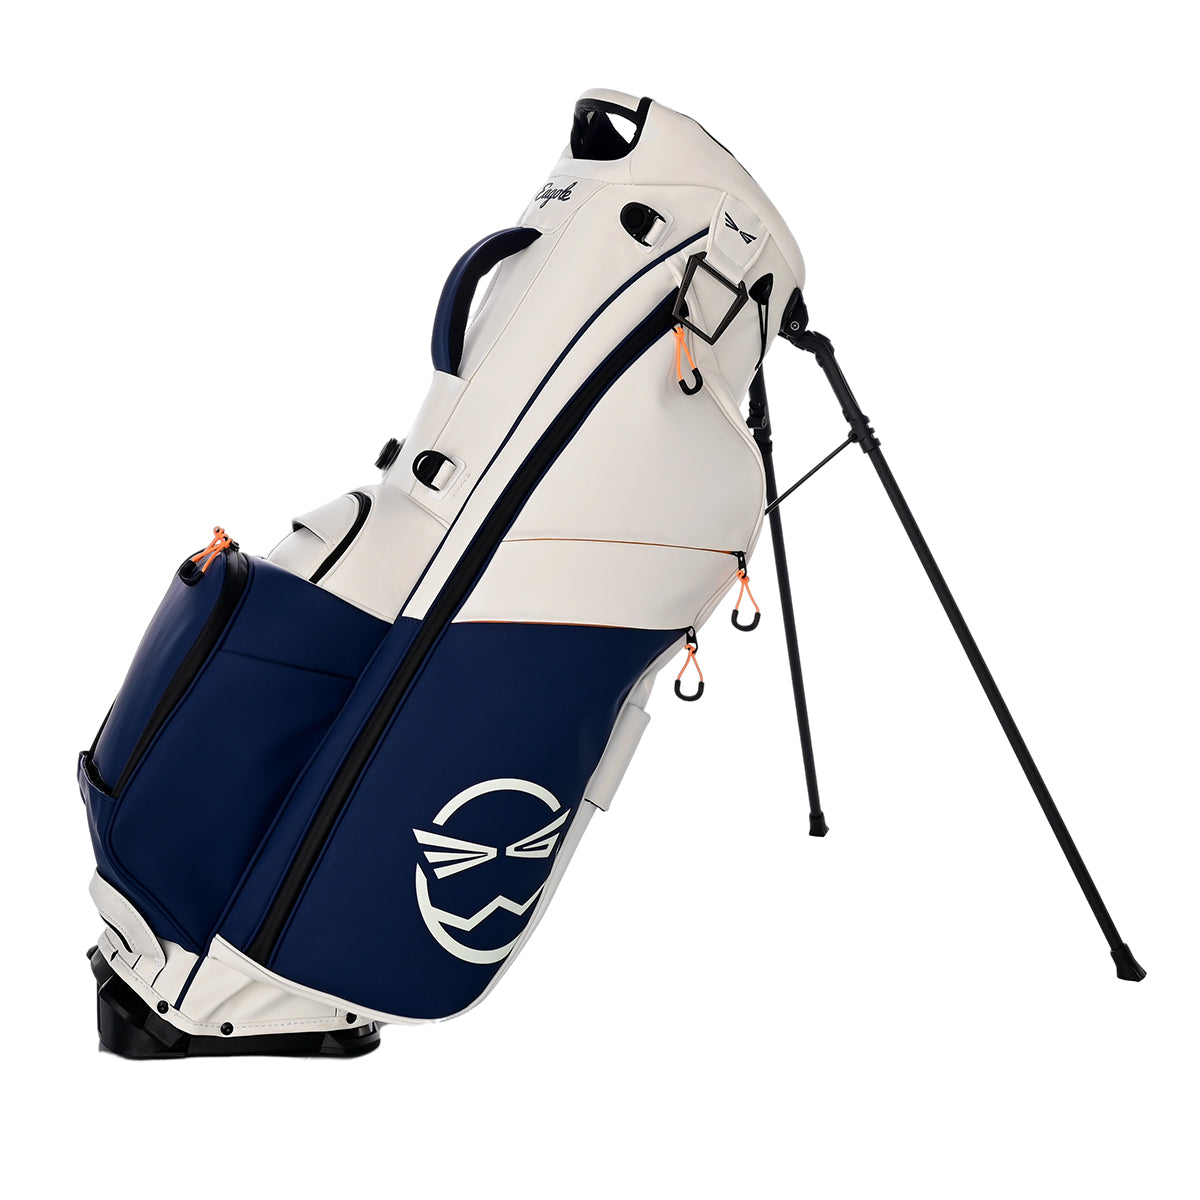 Ask Echo X Eagole 4 Grid High-Quality Golf LUX Leather Stand Bag / Sapphire Blue